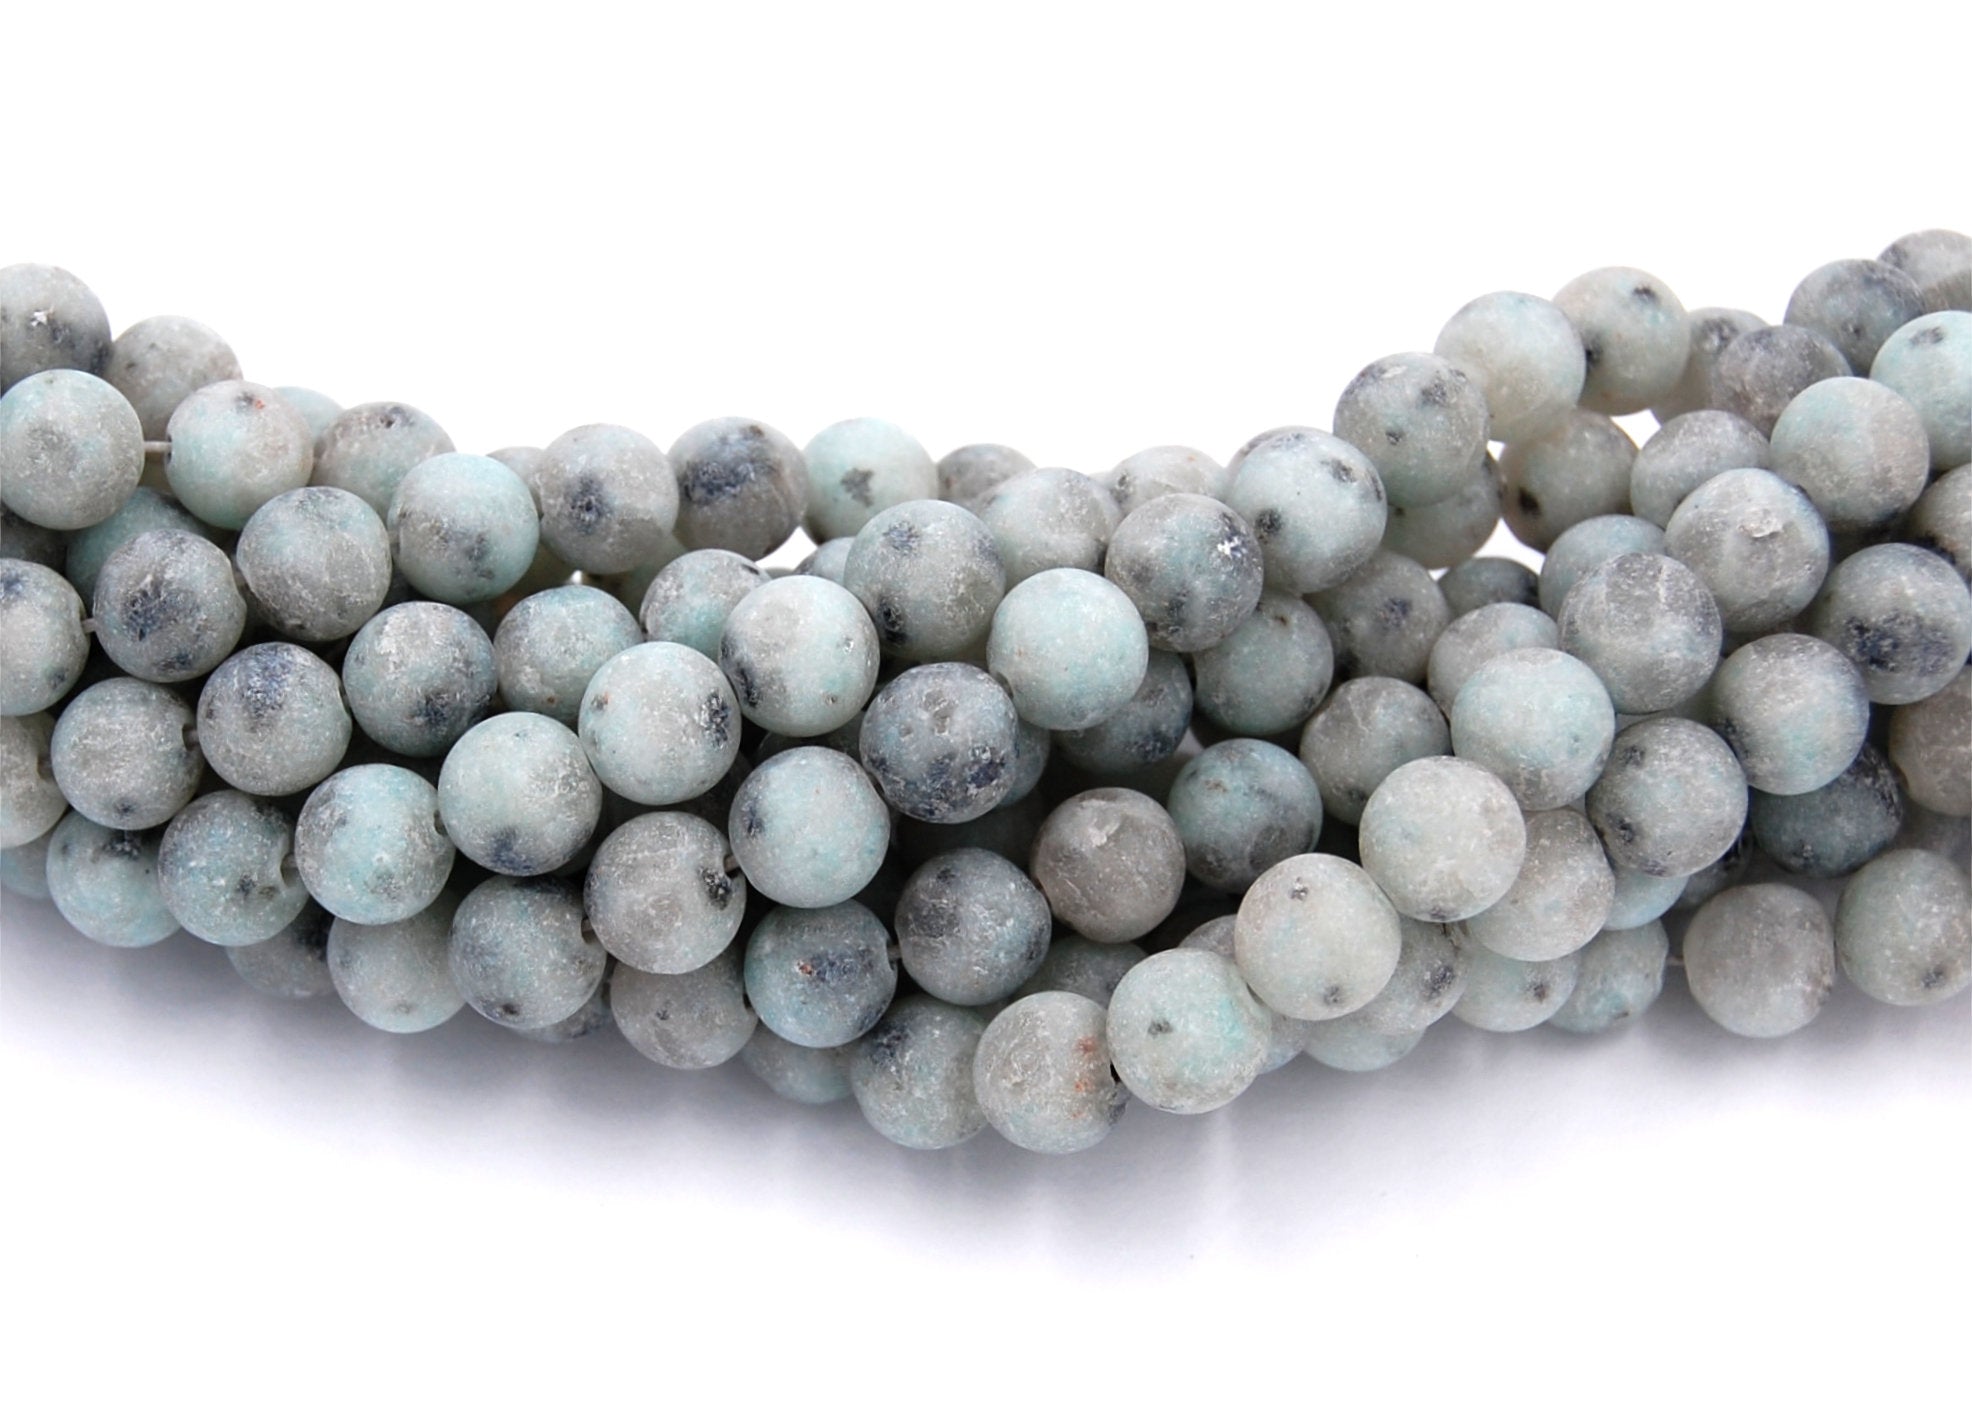 Frosted Pale Turquoise Sesame Jasper 6mm, 8mm, 10mm Round Beads -Full Strand